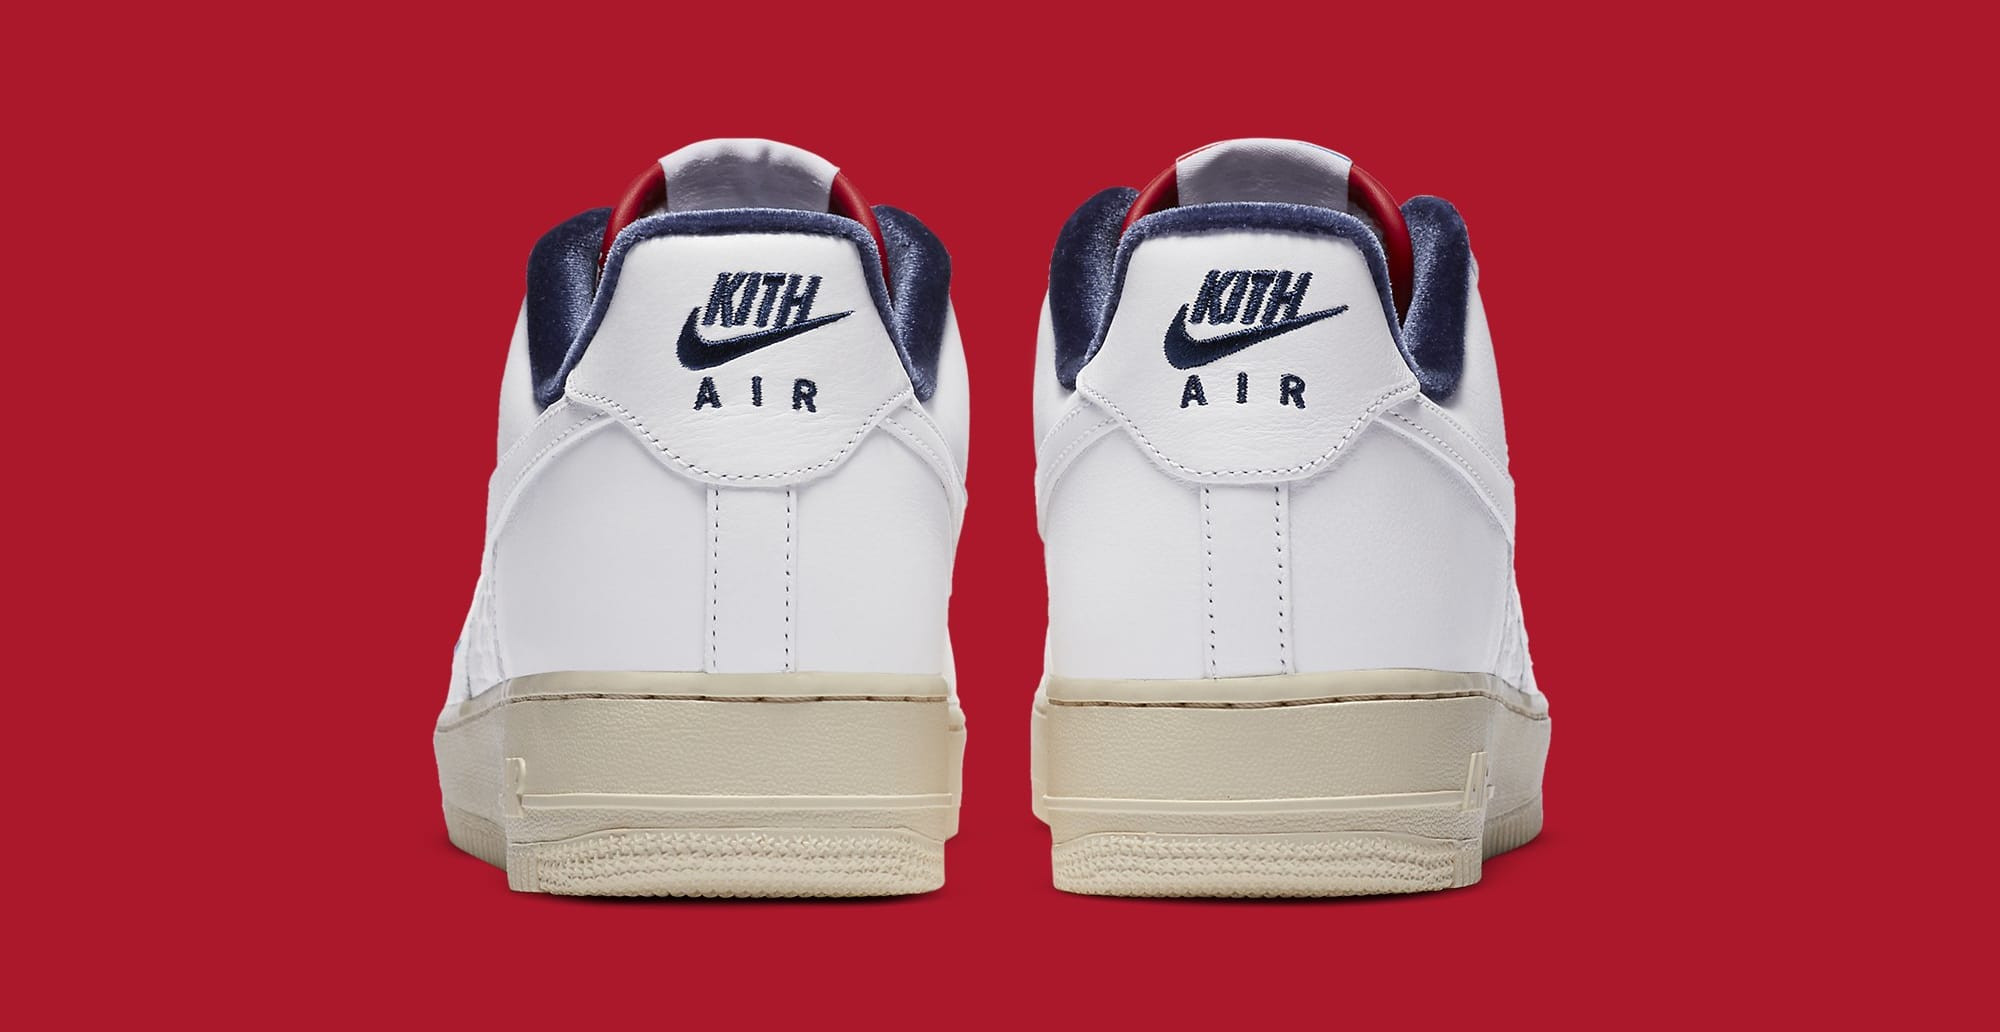 New Kith x Nike Air Force 1 Low Collab Surfaces Online: First Look